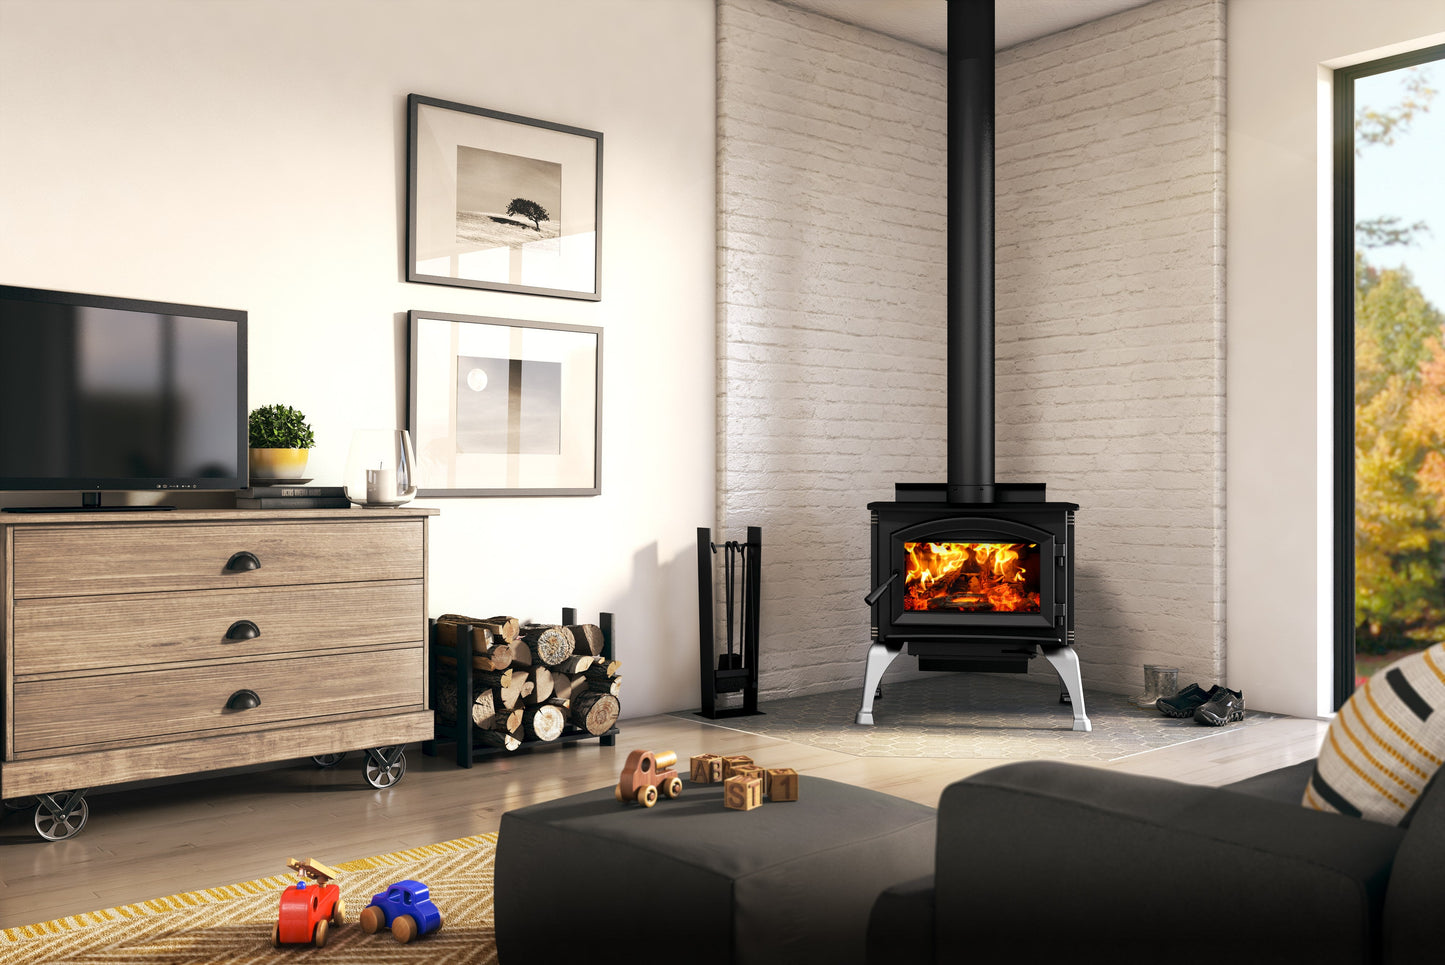 Enerzone Solution 1.7 Wood Burning Stove With Brushed Nickel Cast Iron Traditional Legs & Ash Drawer